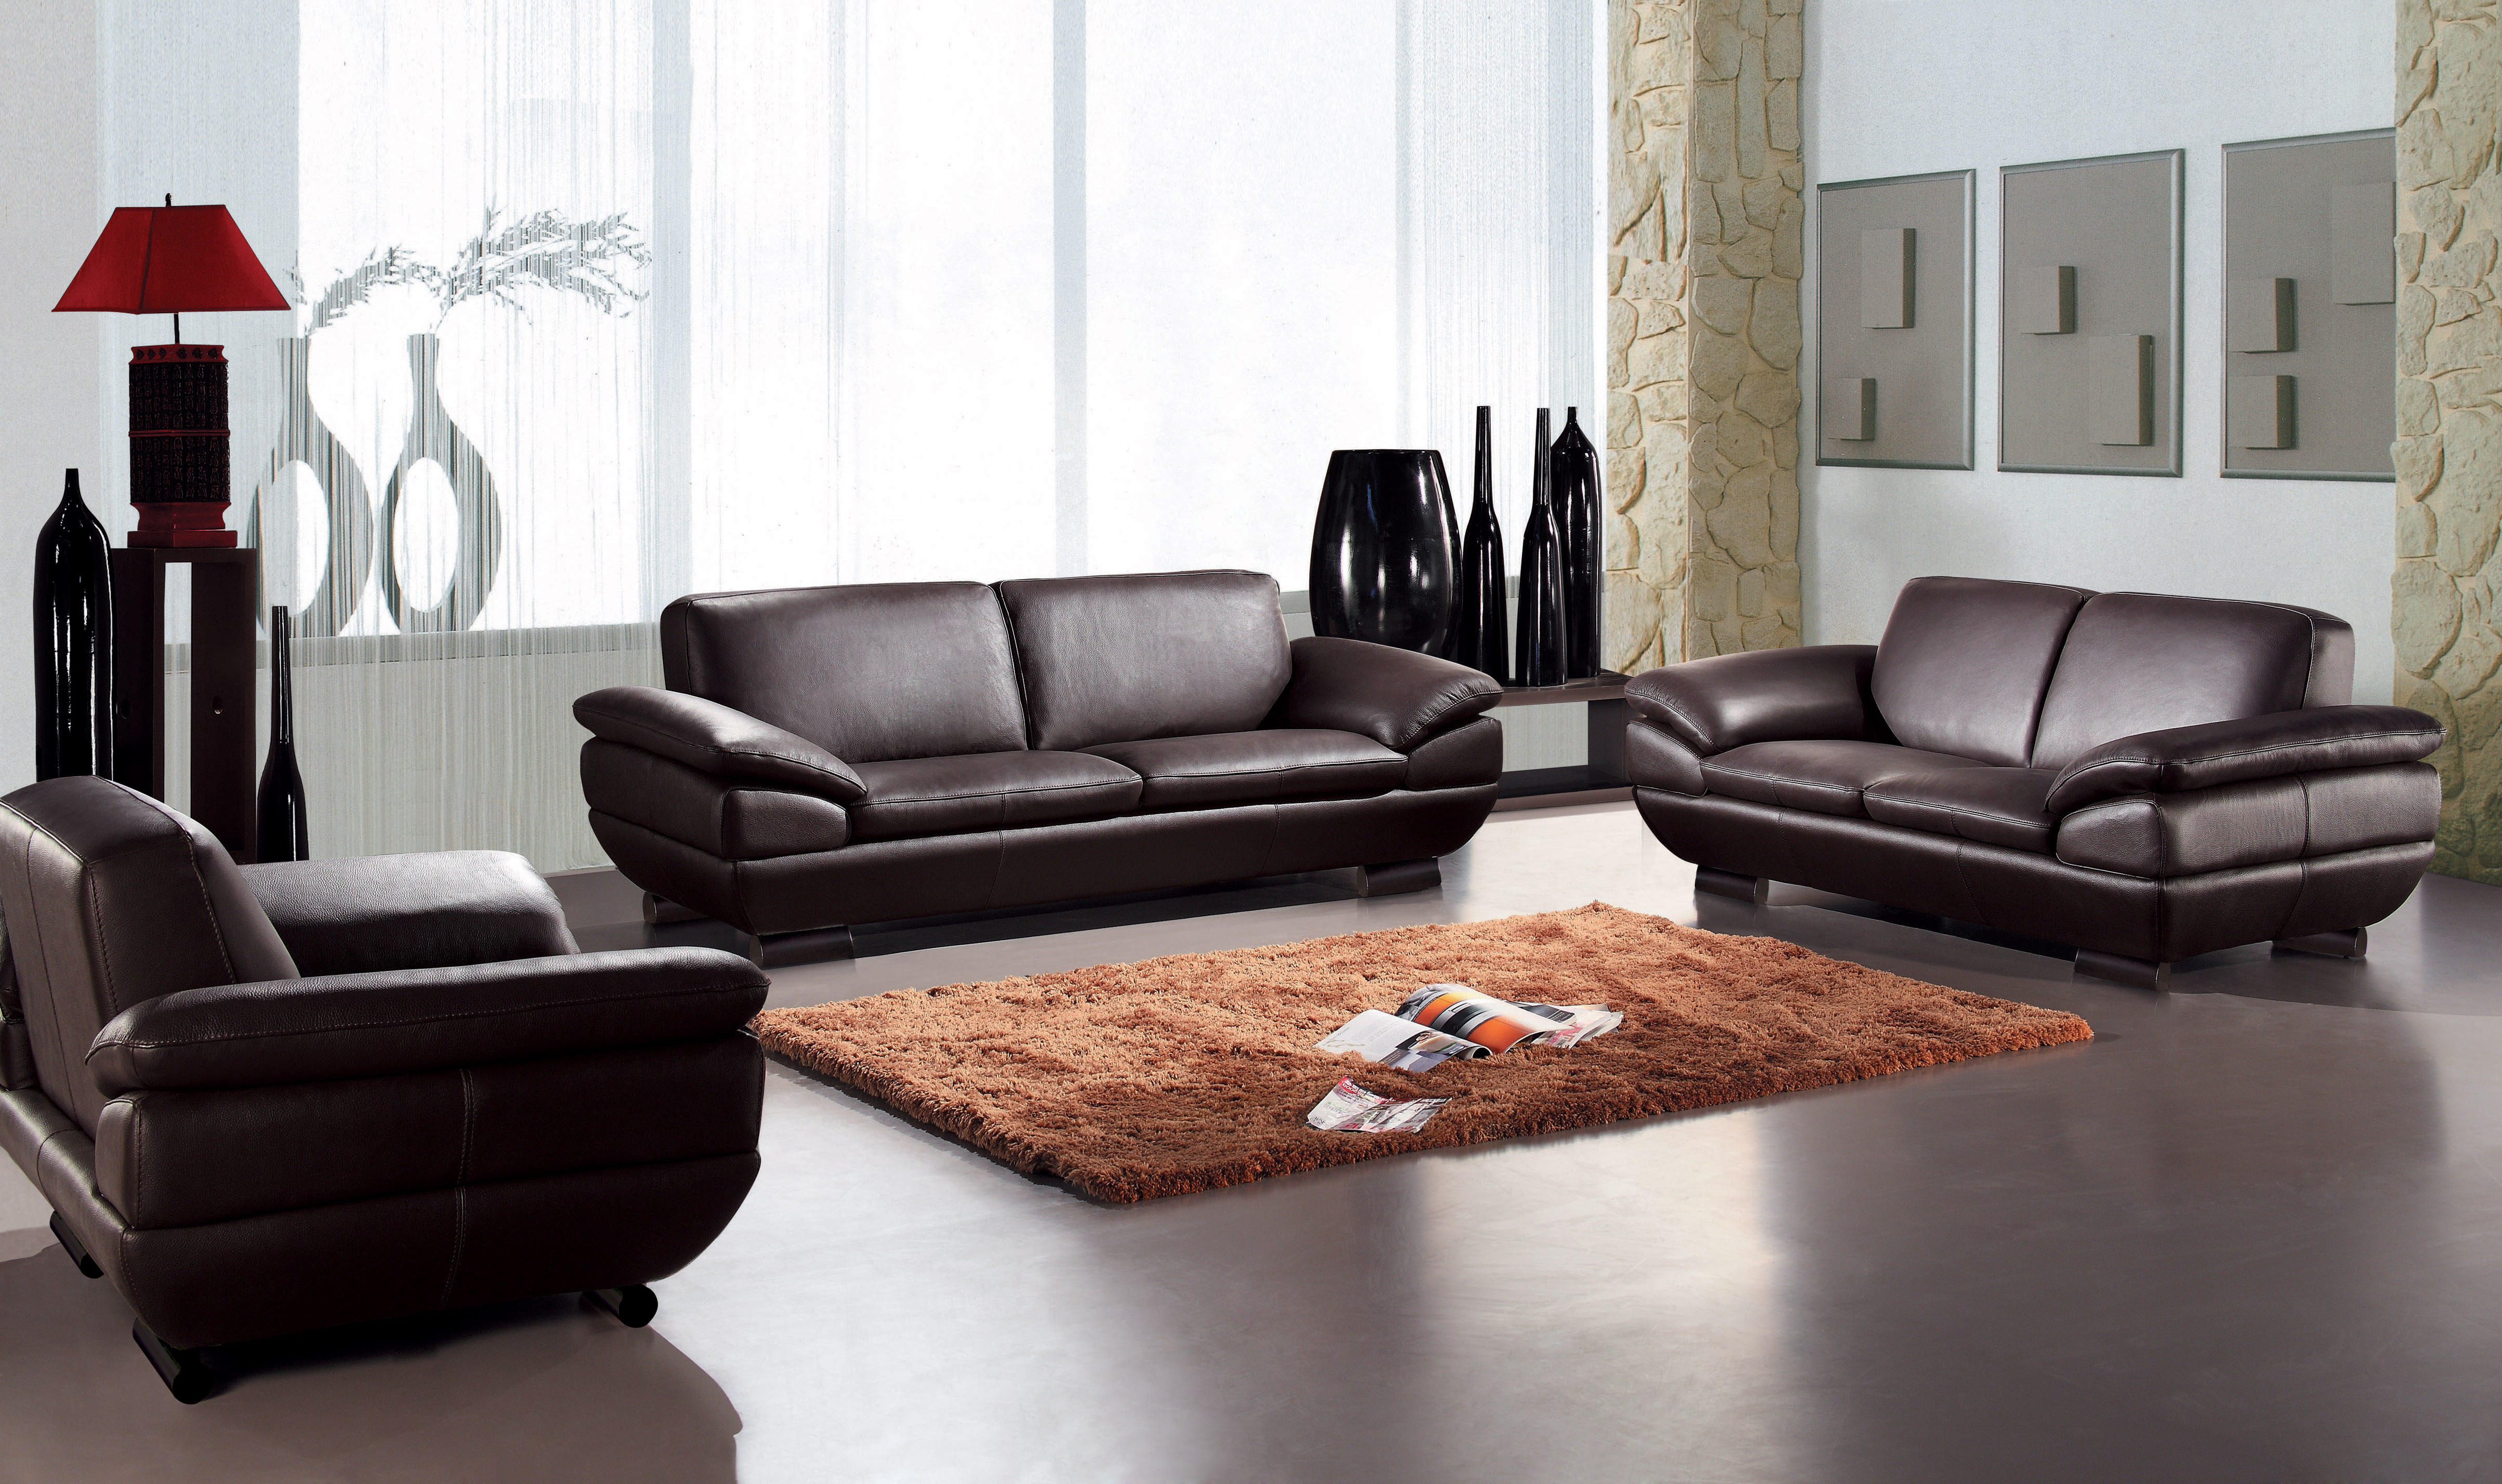 living room design with leather couch